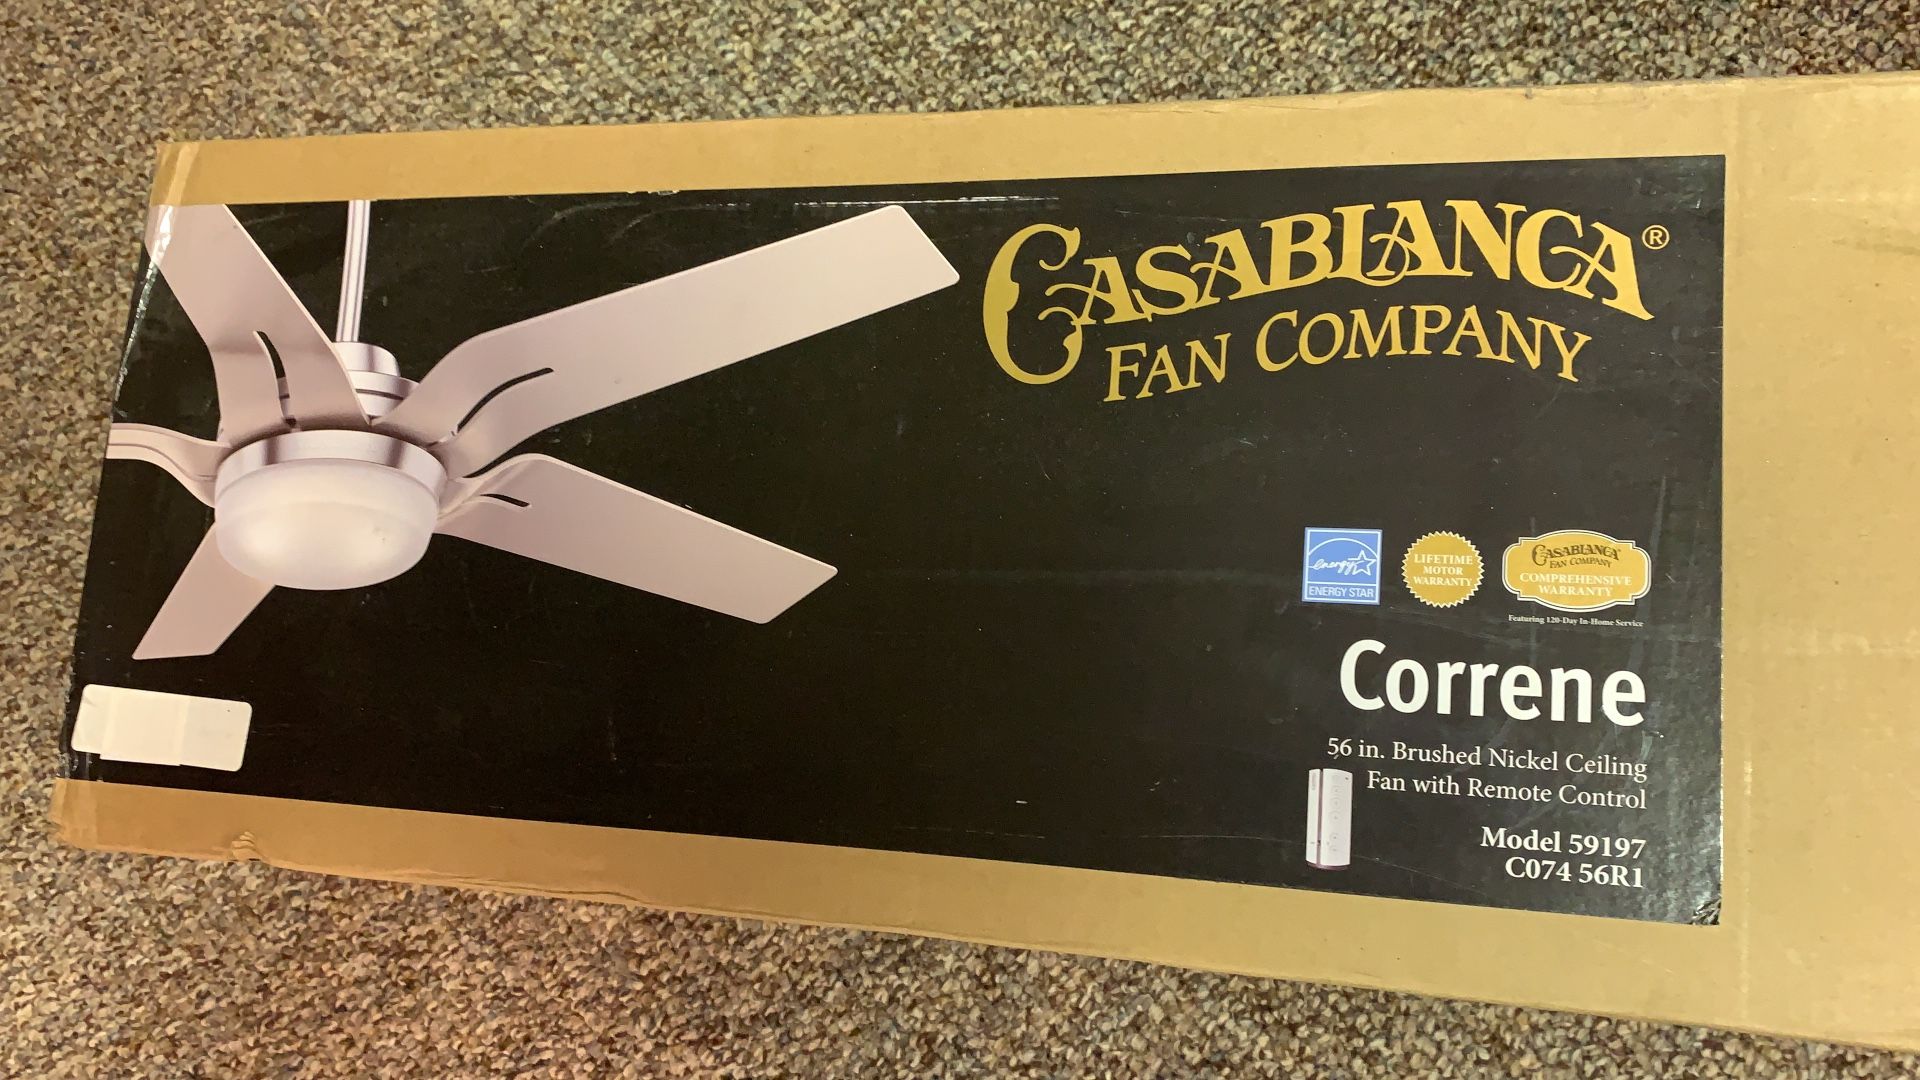 Ceiling Fan Casablanca Correne 56 inch brushed nickel ceiling fan with remote